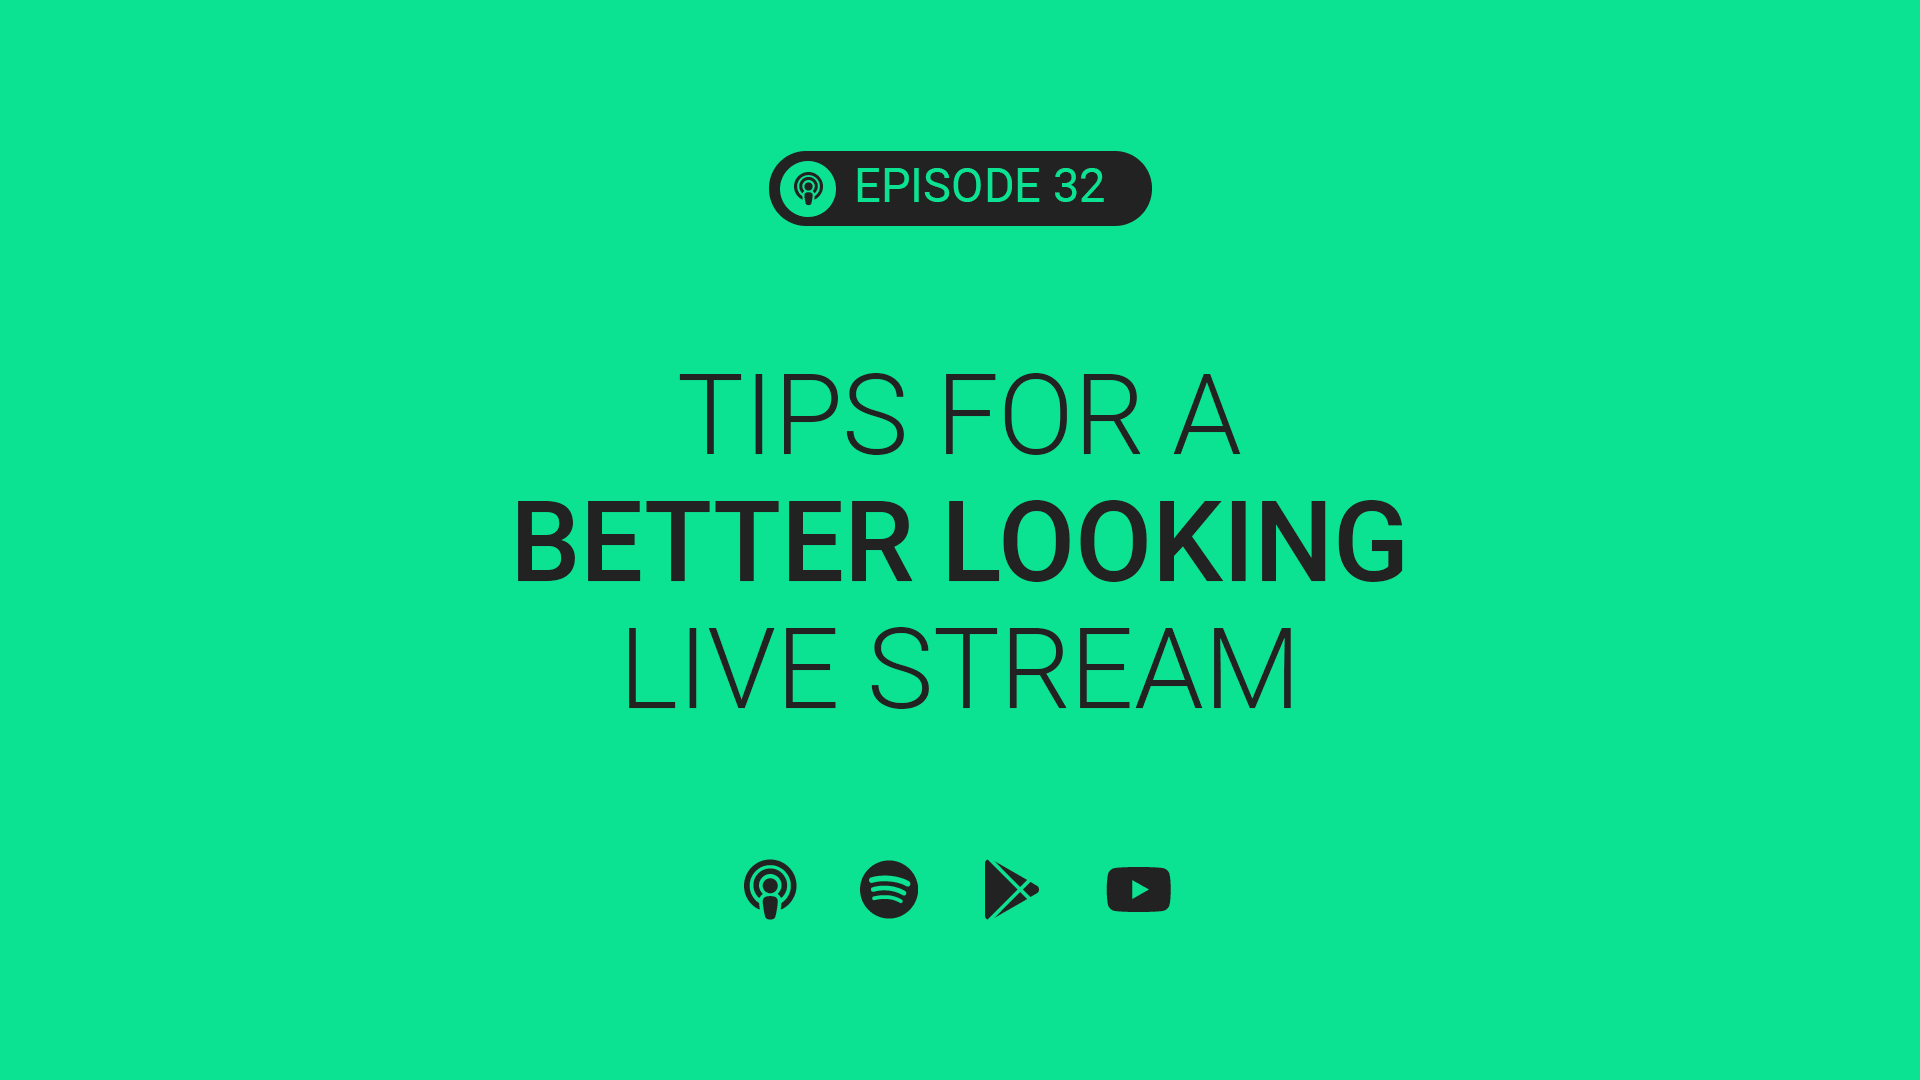 Tips for a Better Looking Live Stream